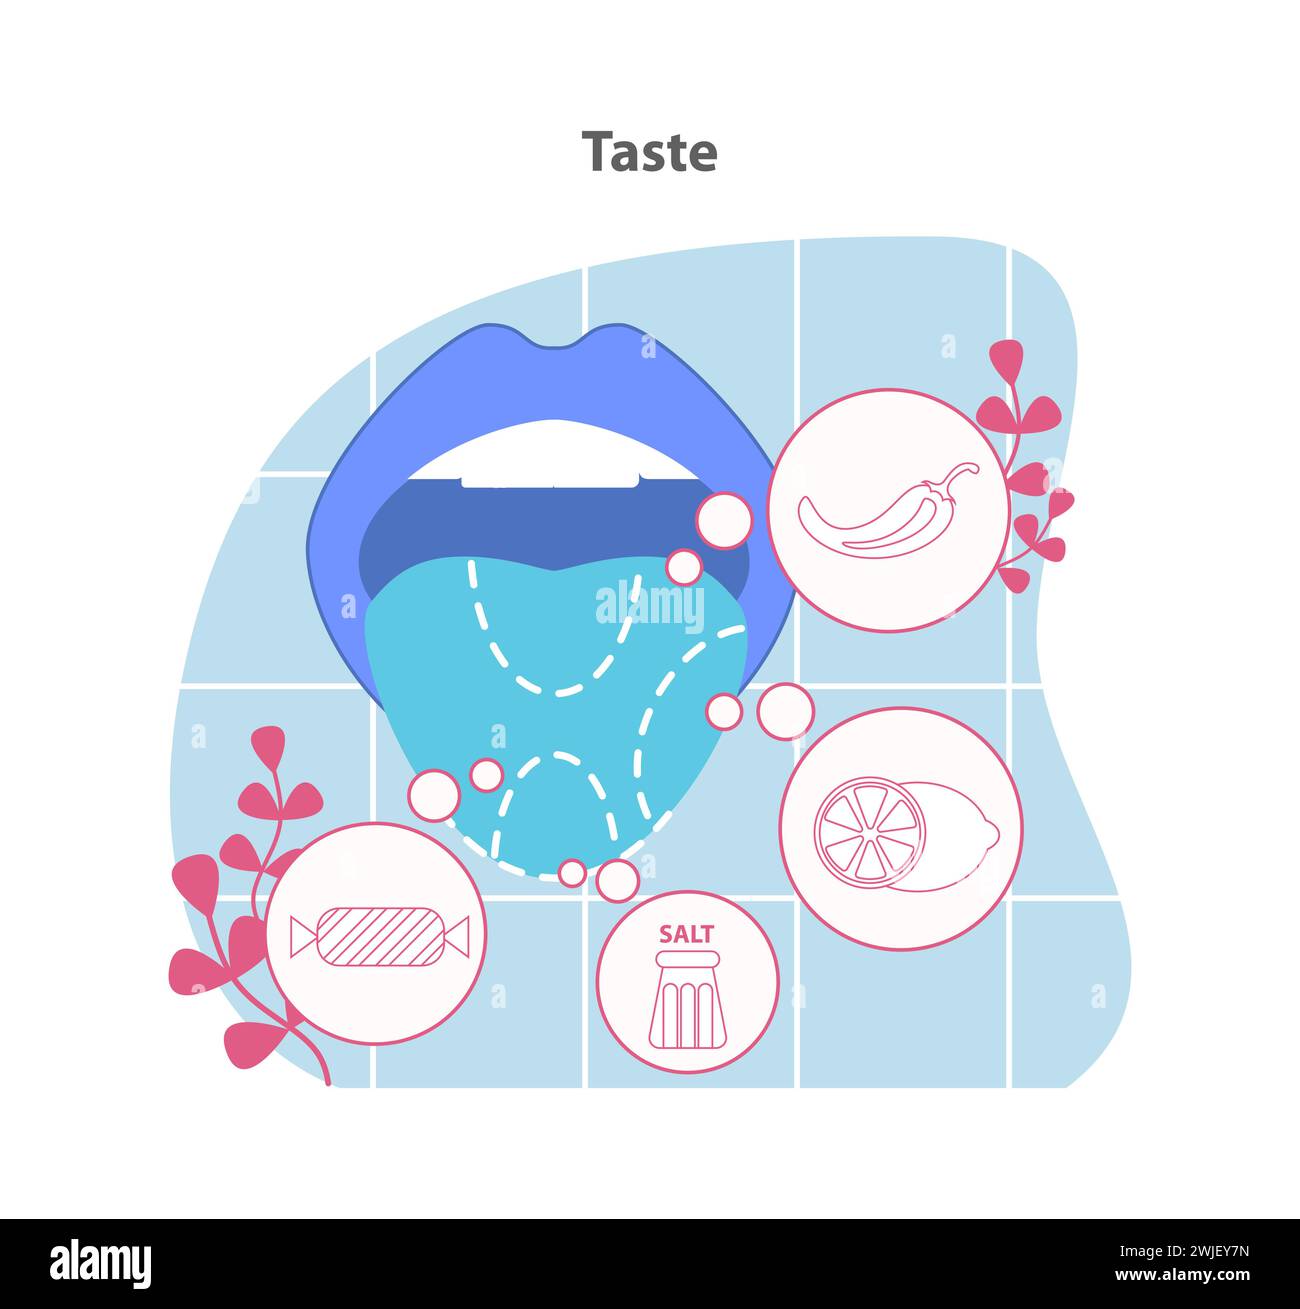 Taste illustration. A depiction of the gustatory system with symbols for sweet, sour, salty, and bitter flavors. The complexity of taste perception. Flat vector illustration. Stock Vector